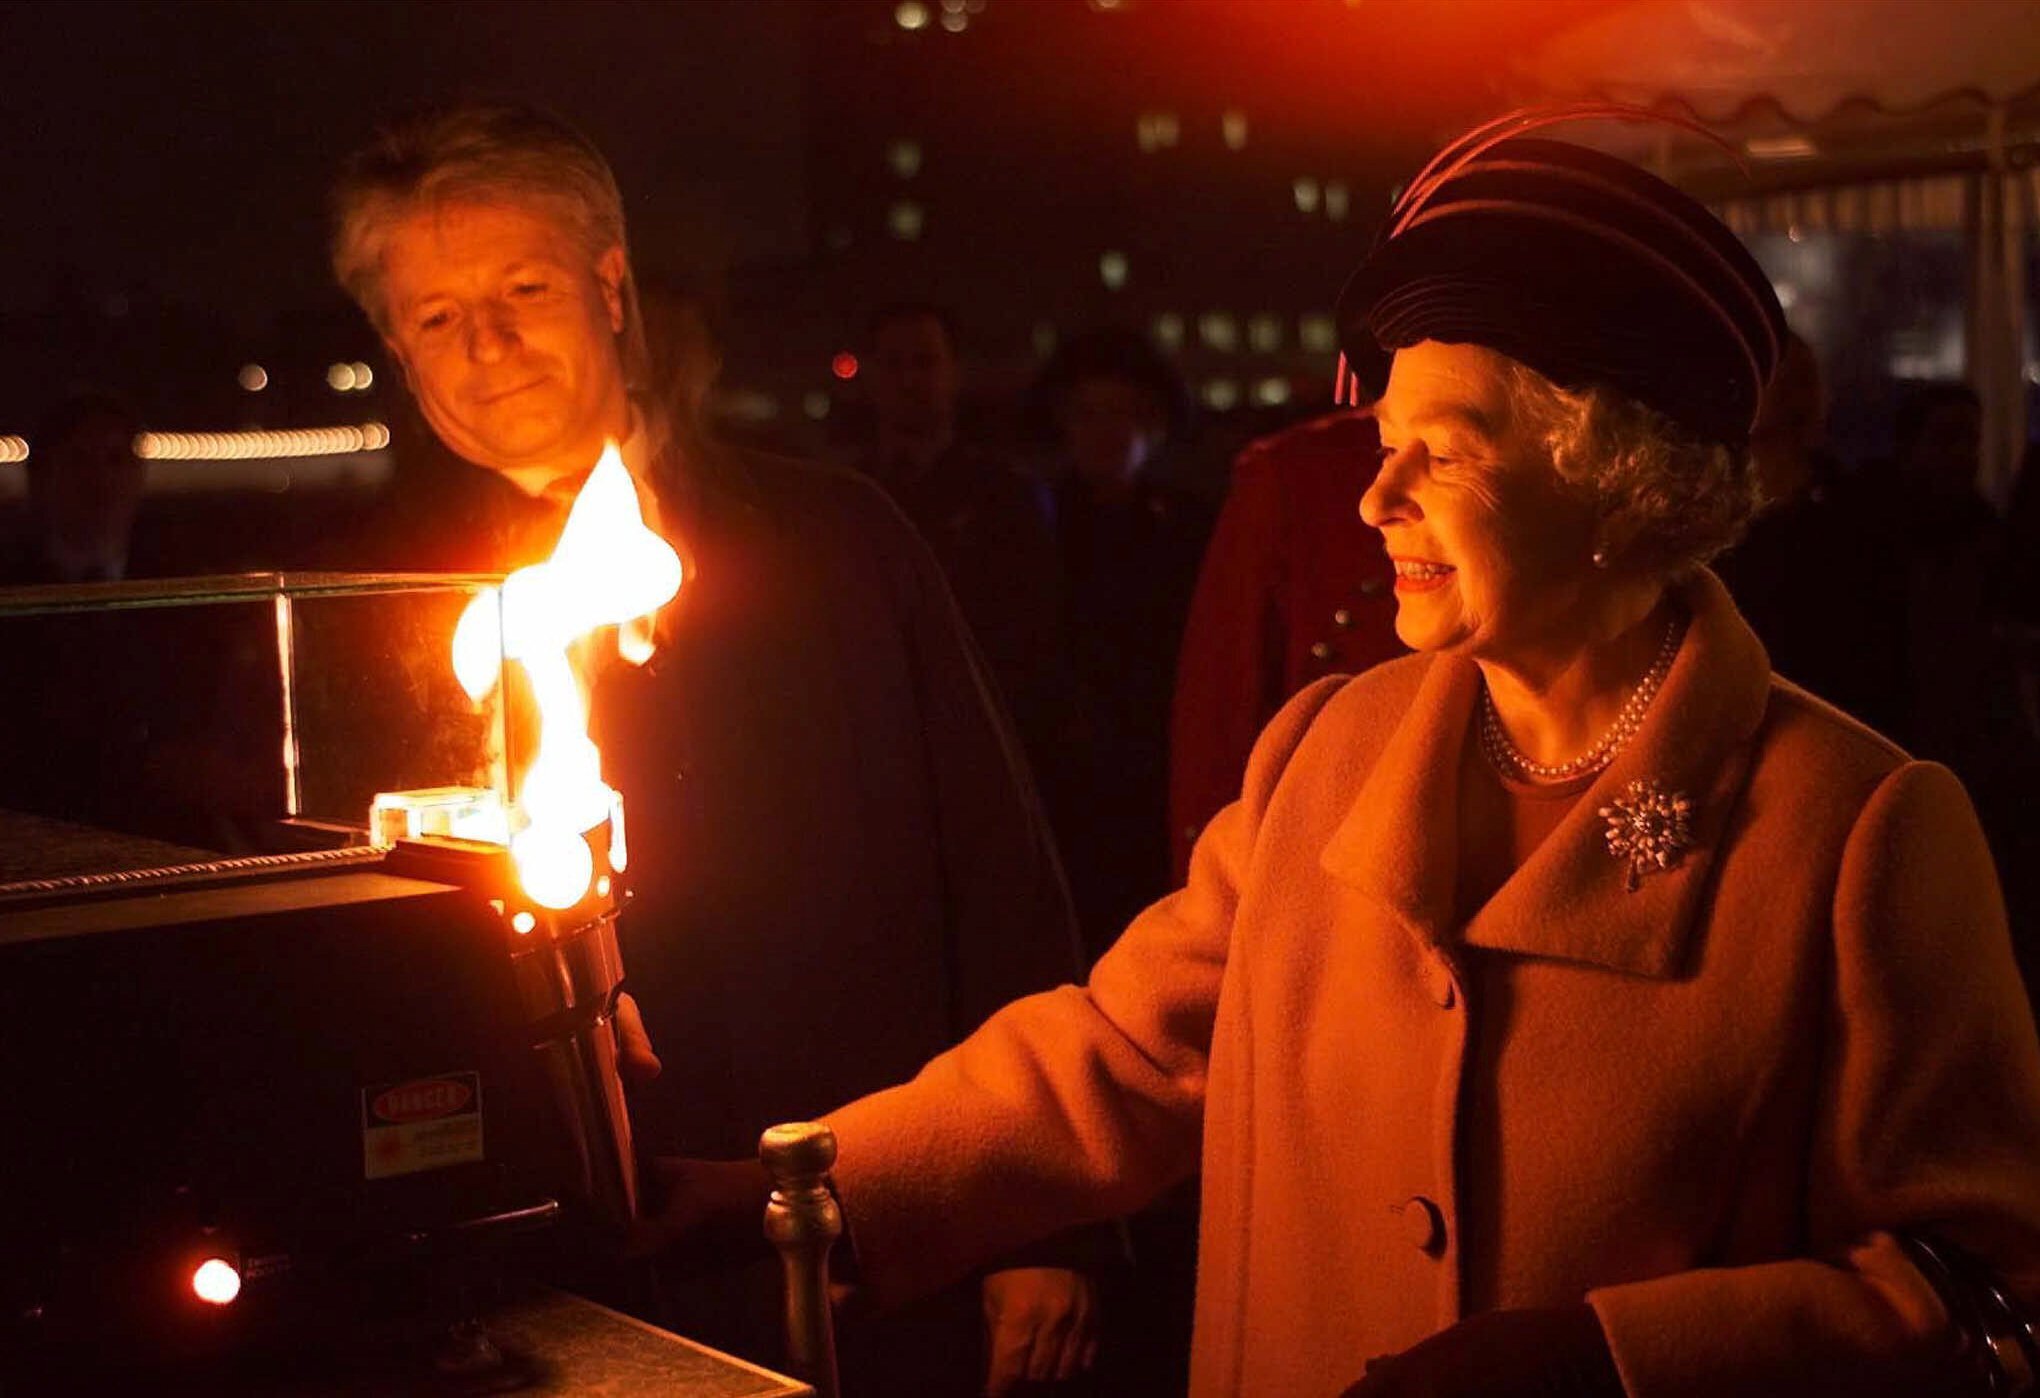 Britain's Queen Elizabeth II during a wreath laying ceremony at the central German memorial for the victims of war and tyranny 'Neue Wache' in Berlin, Nov. 2, 2004. (AP Photo/Markus Schreiber)